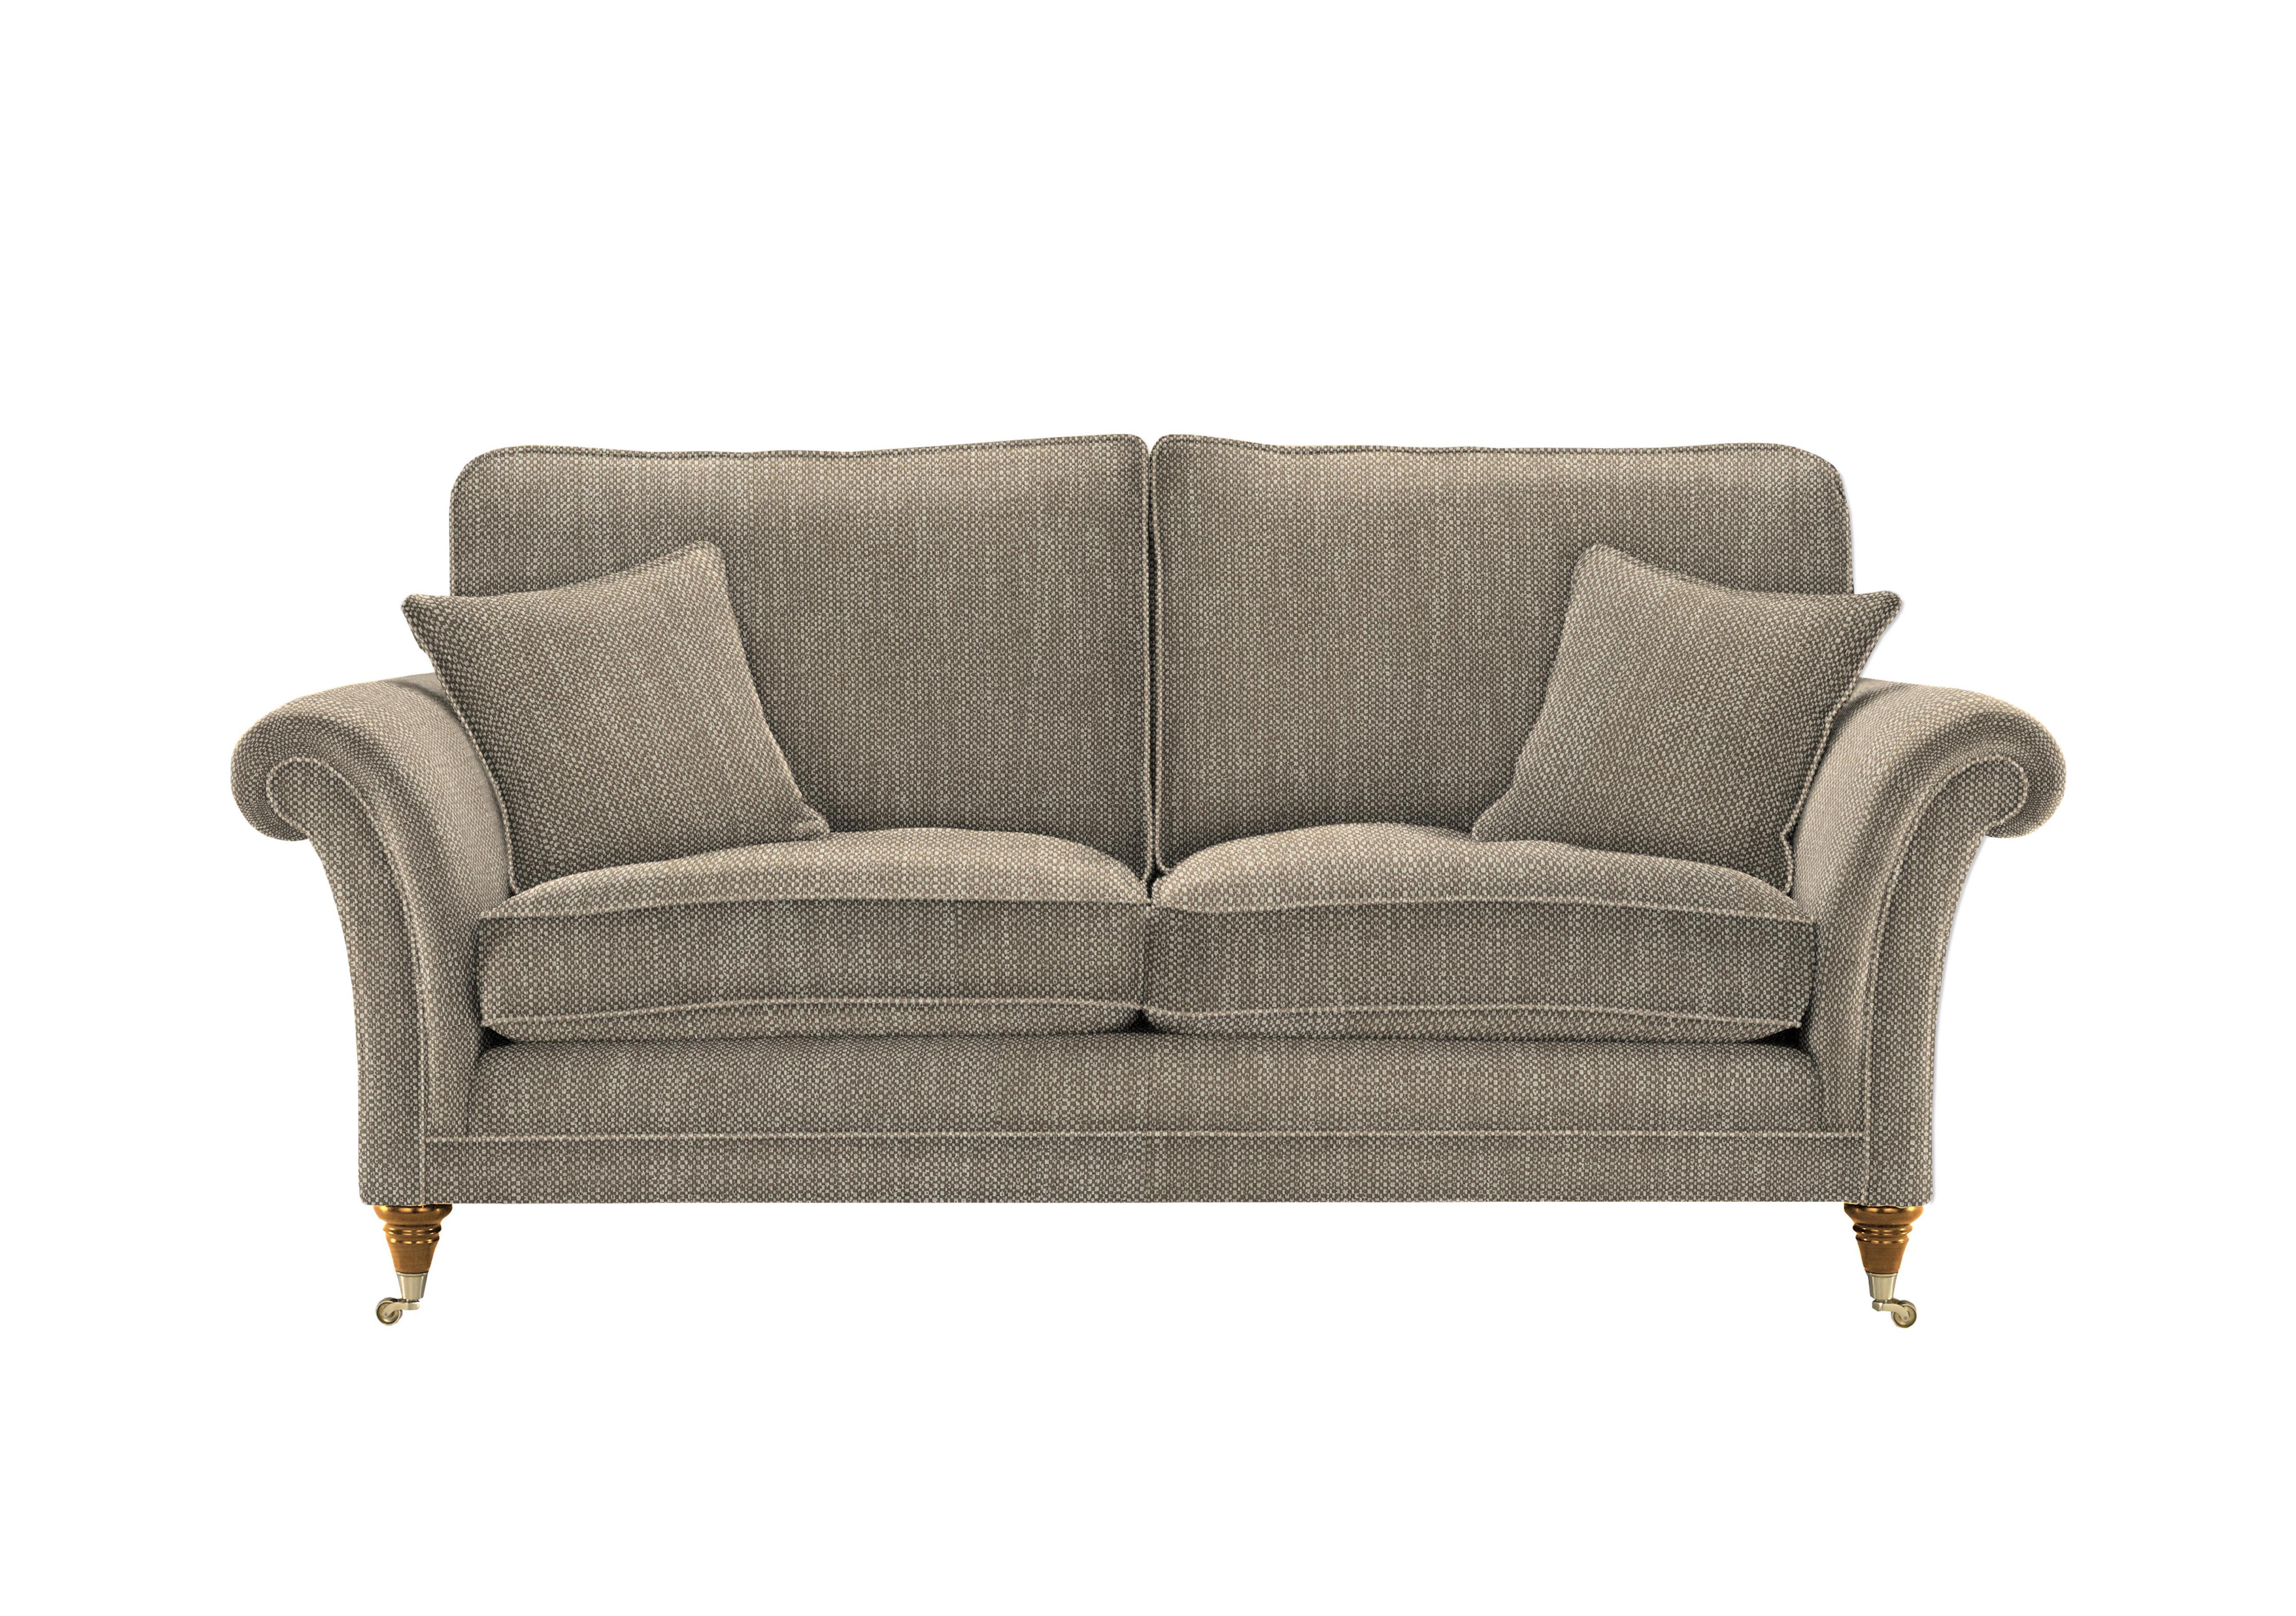 Burghley Large 2 Seater Fabric Sofa in 001477-0025 Metric Sable on Furniture Village